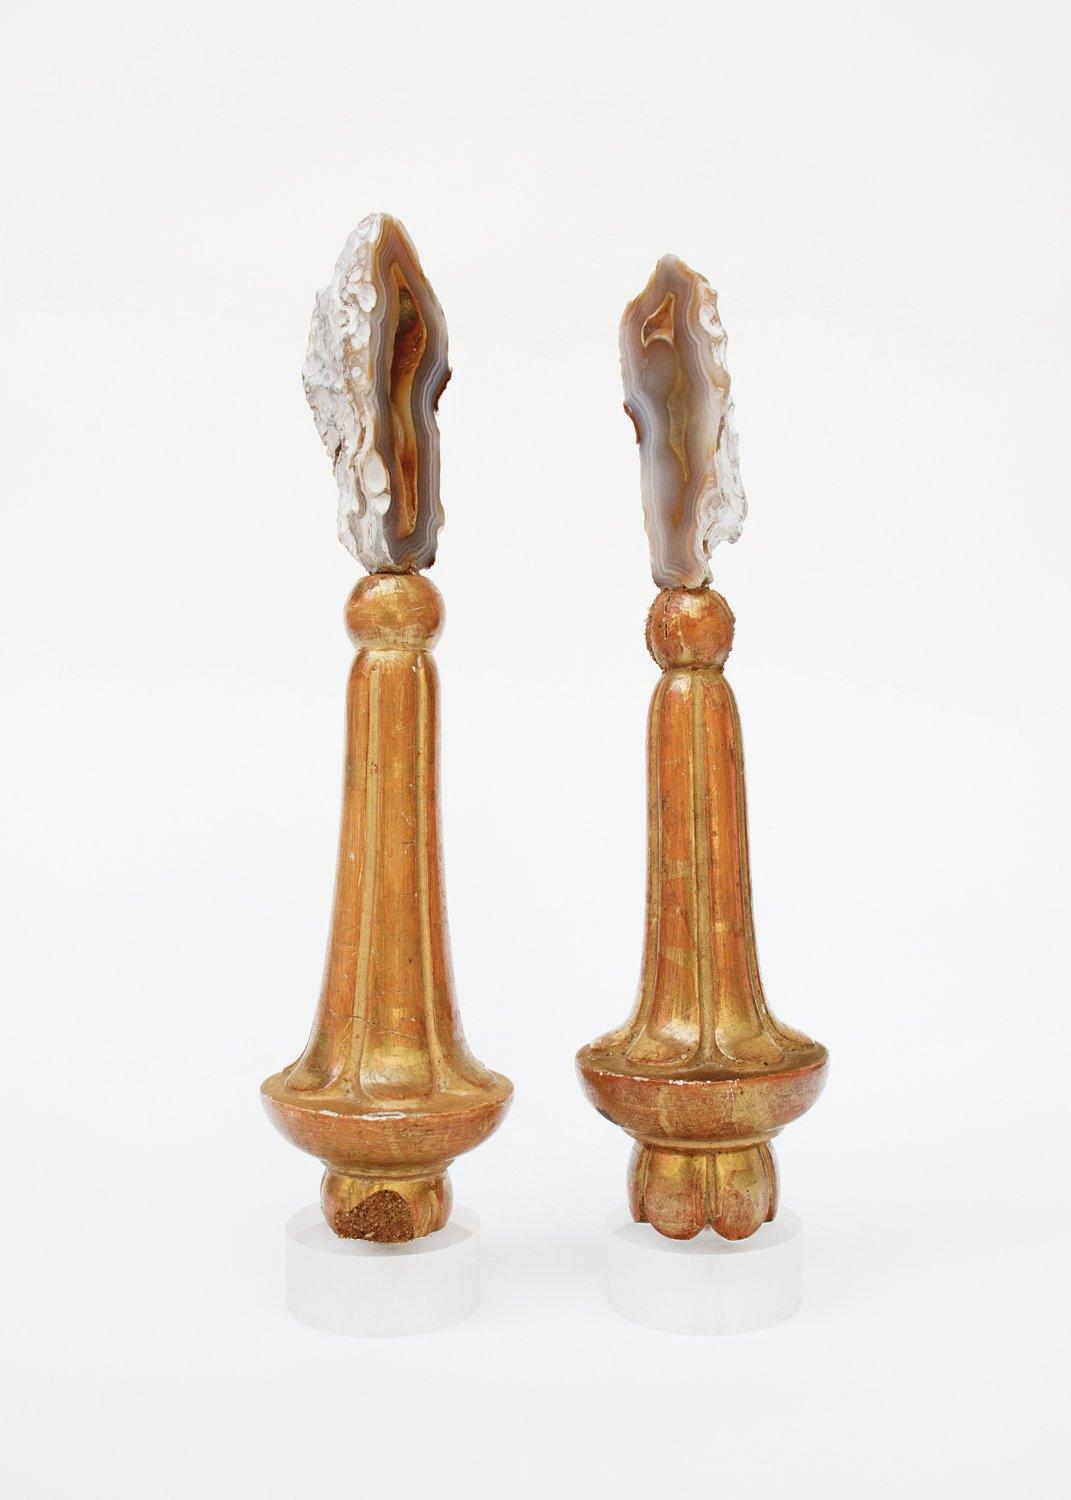 Rococo Pair of 18th Century Italian Finial Bases with Agate Coral on a Lucite Base For Sale